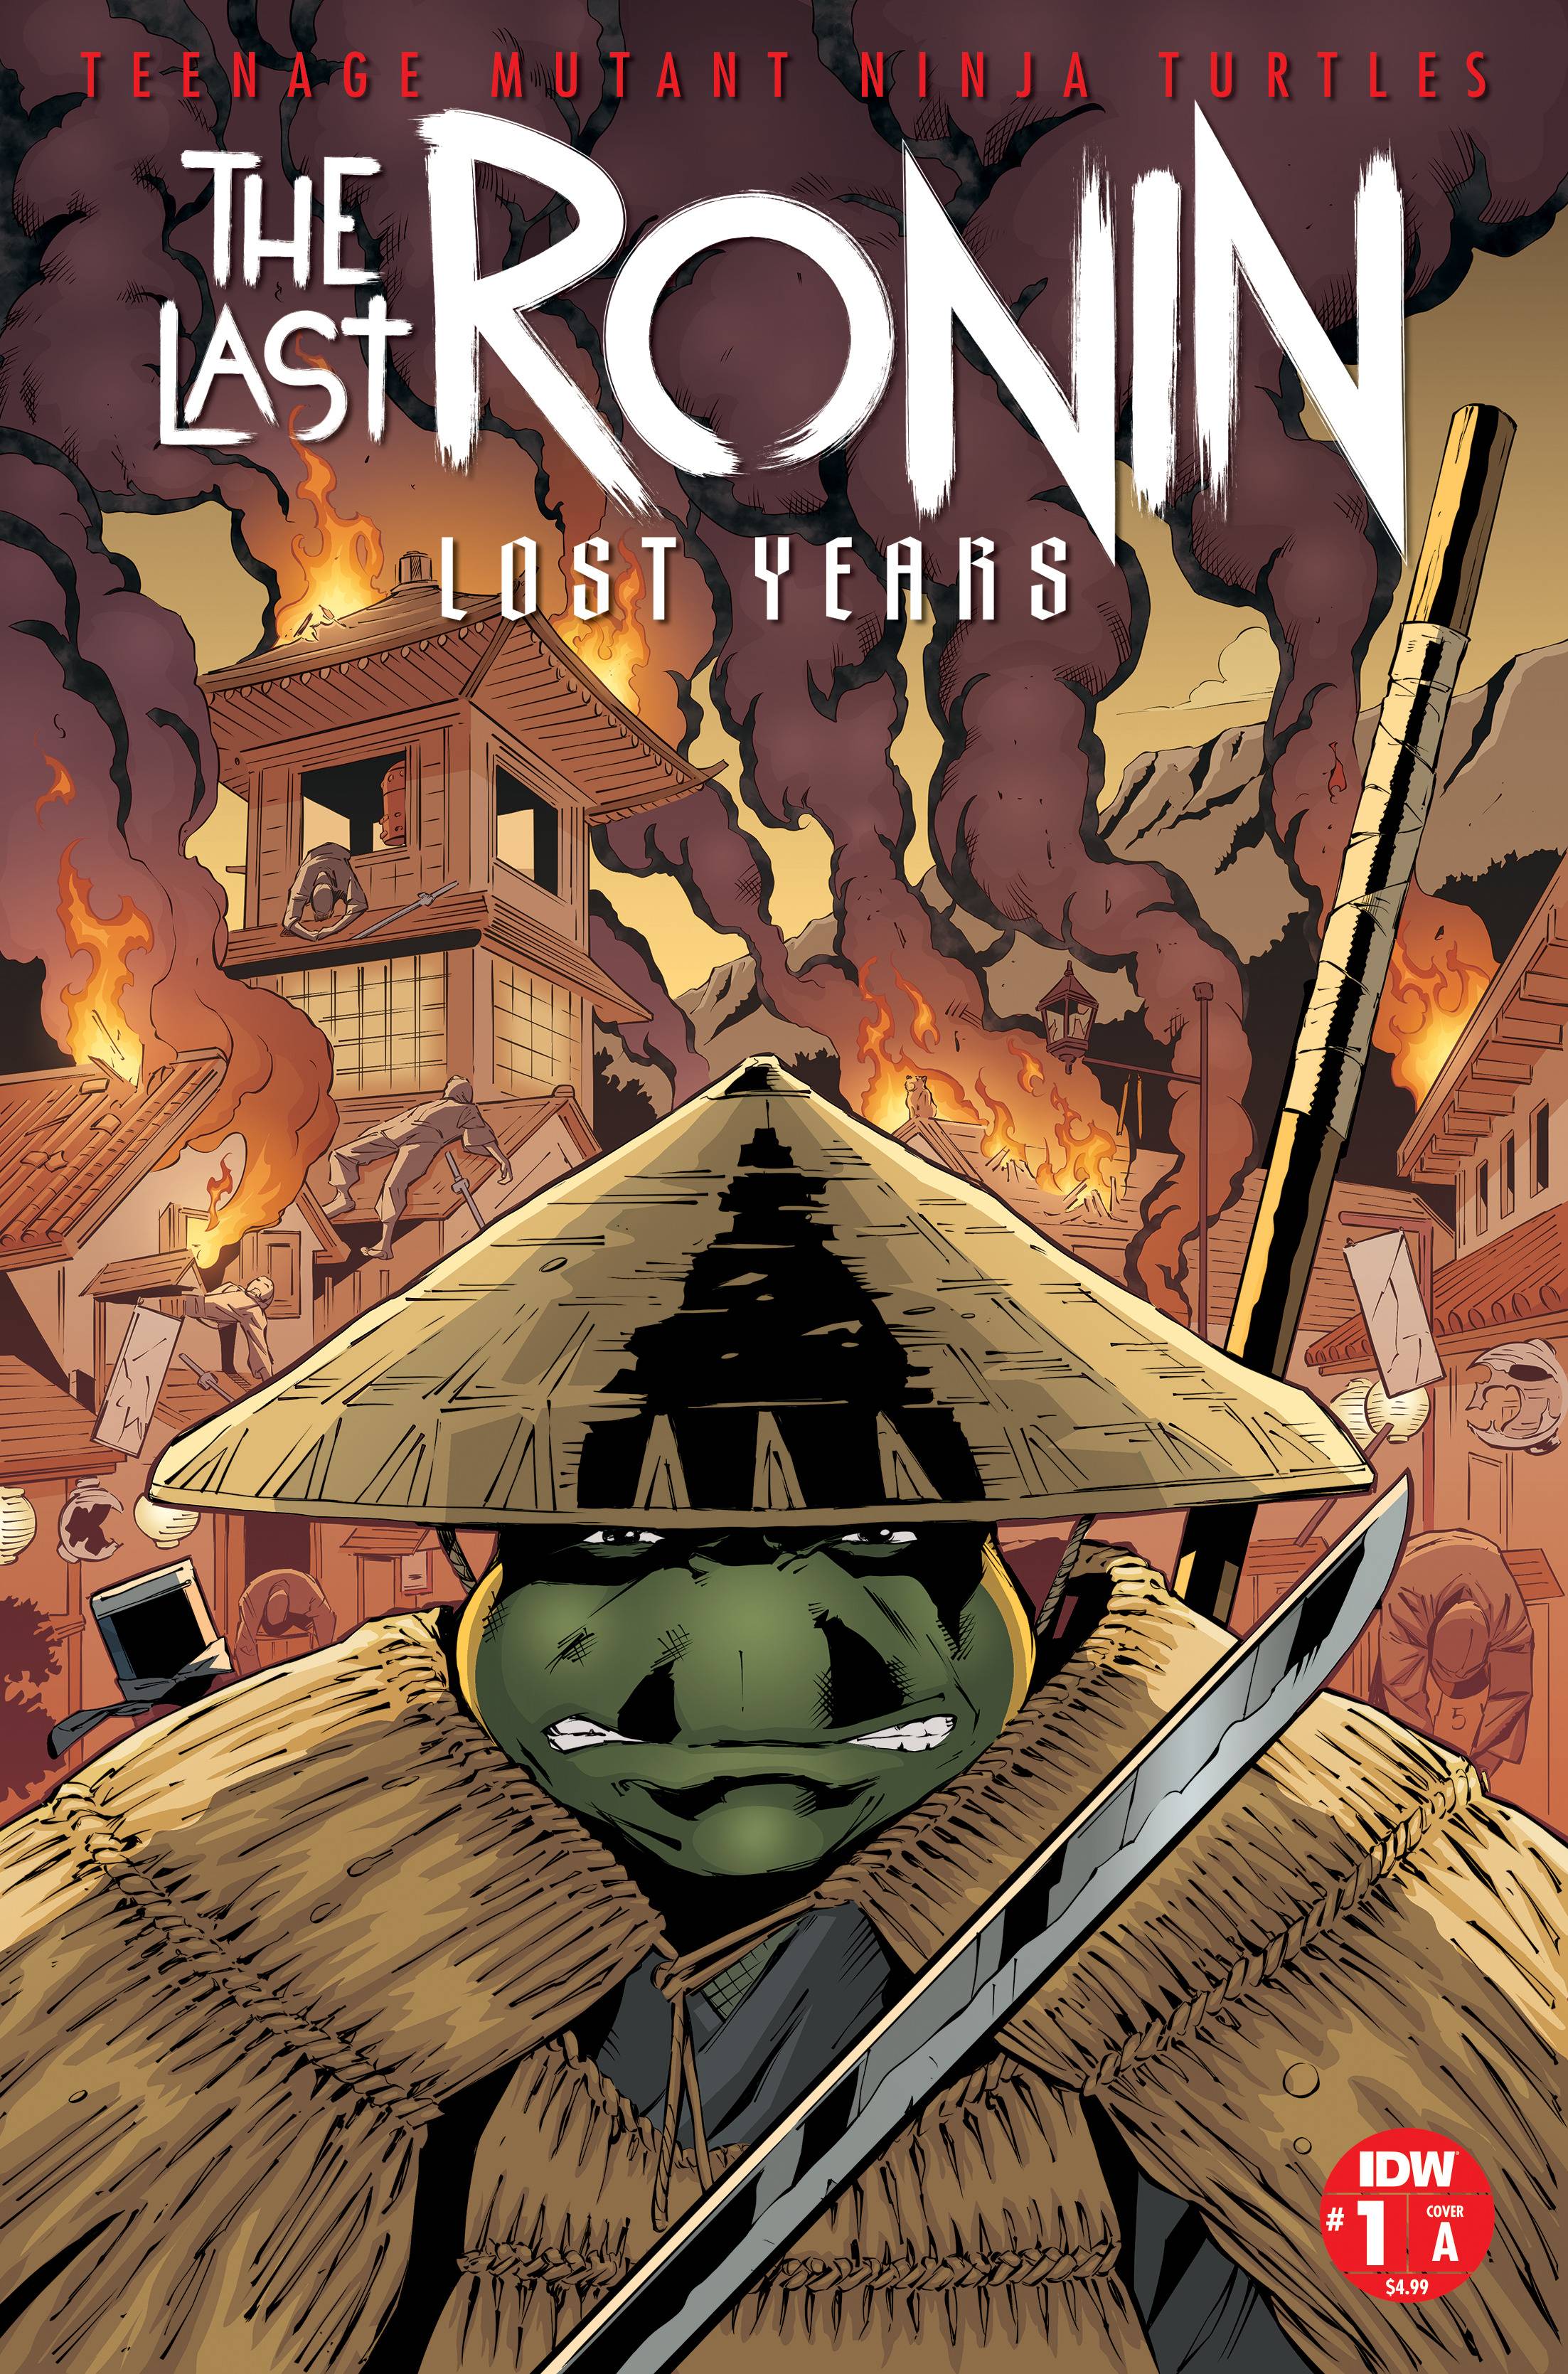 Comic Collection Teenage Mutant Ninja Turtles The Last Ronin The Lost Years #1 - #5 Cover A